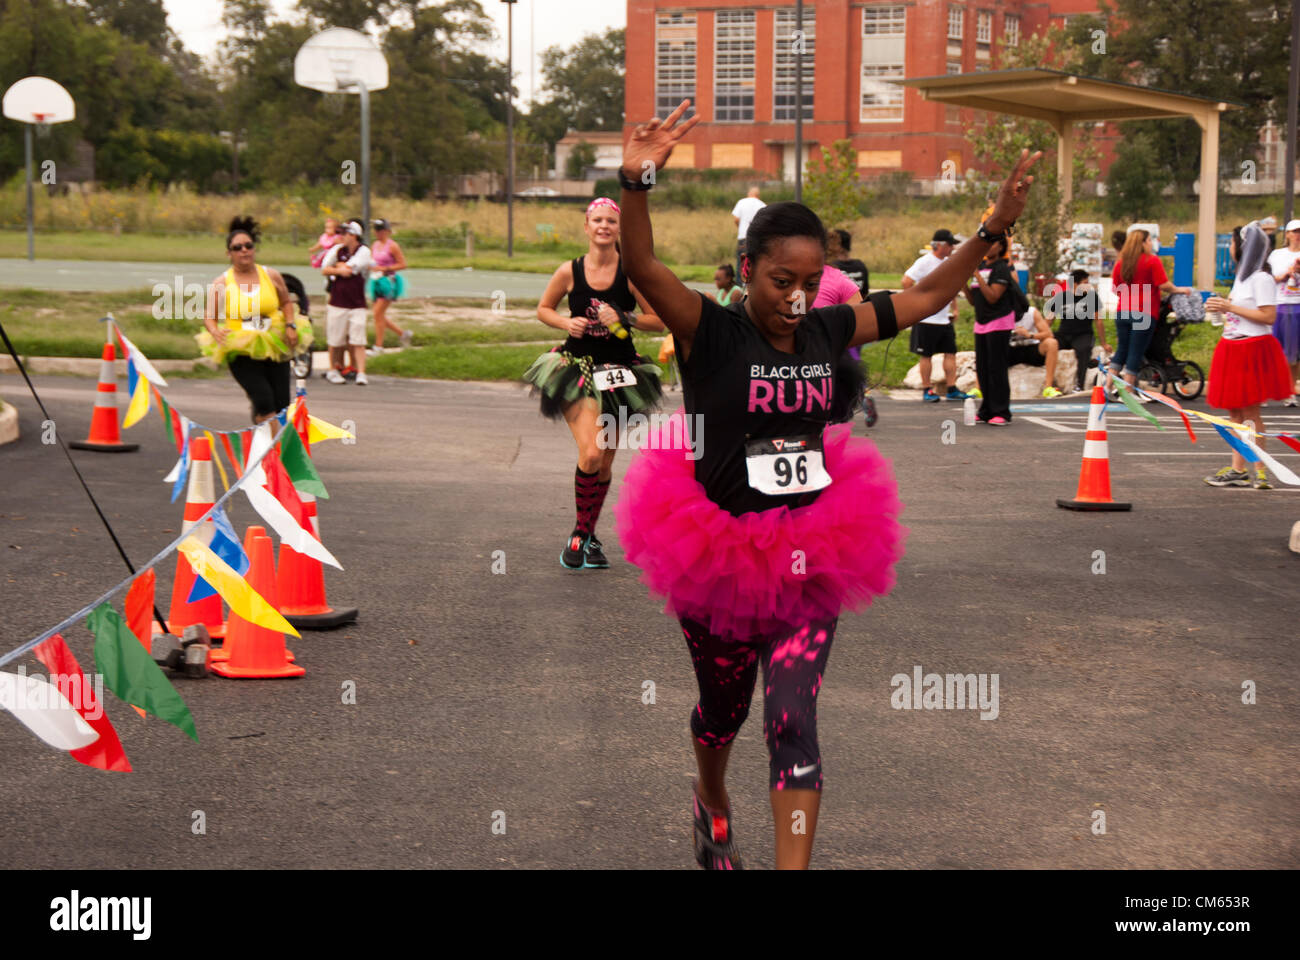 13 October 2012 San Antonio, Texas, USA - 240 Runners participated in the inaugural Tutus & Brews 5k/10k run to raise money for the Cystic Fibrosis Foundation. Runners were encouraged to wear a tutu during the run, and beer was made available to runners after the event. Stock Photo